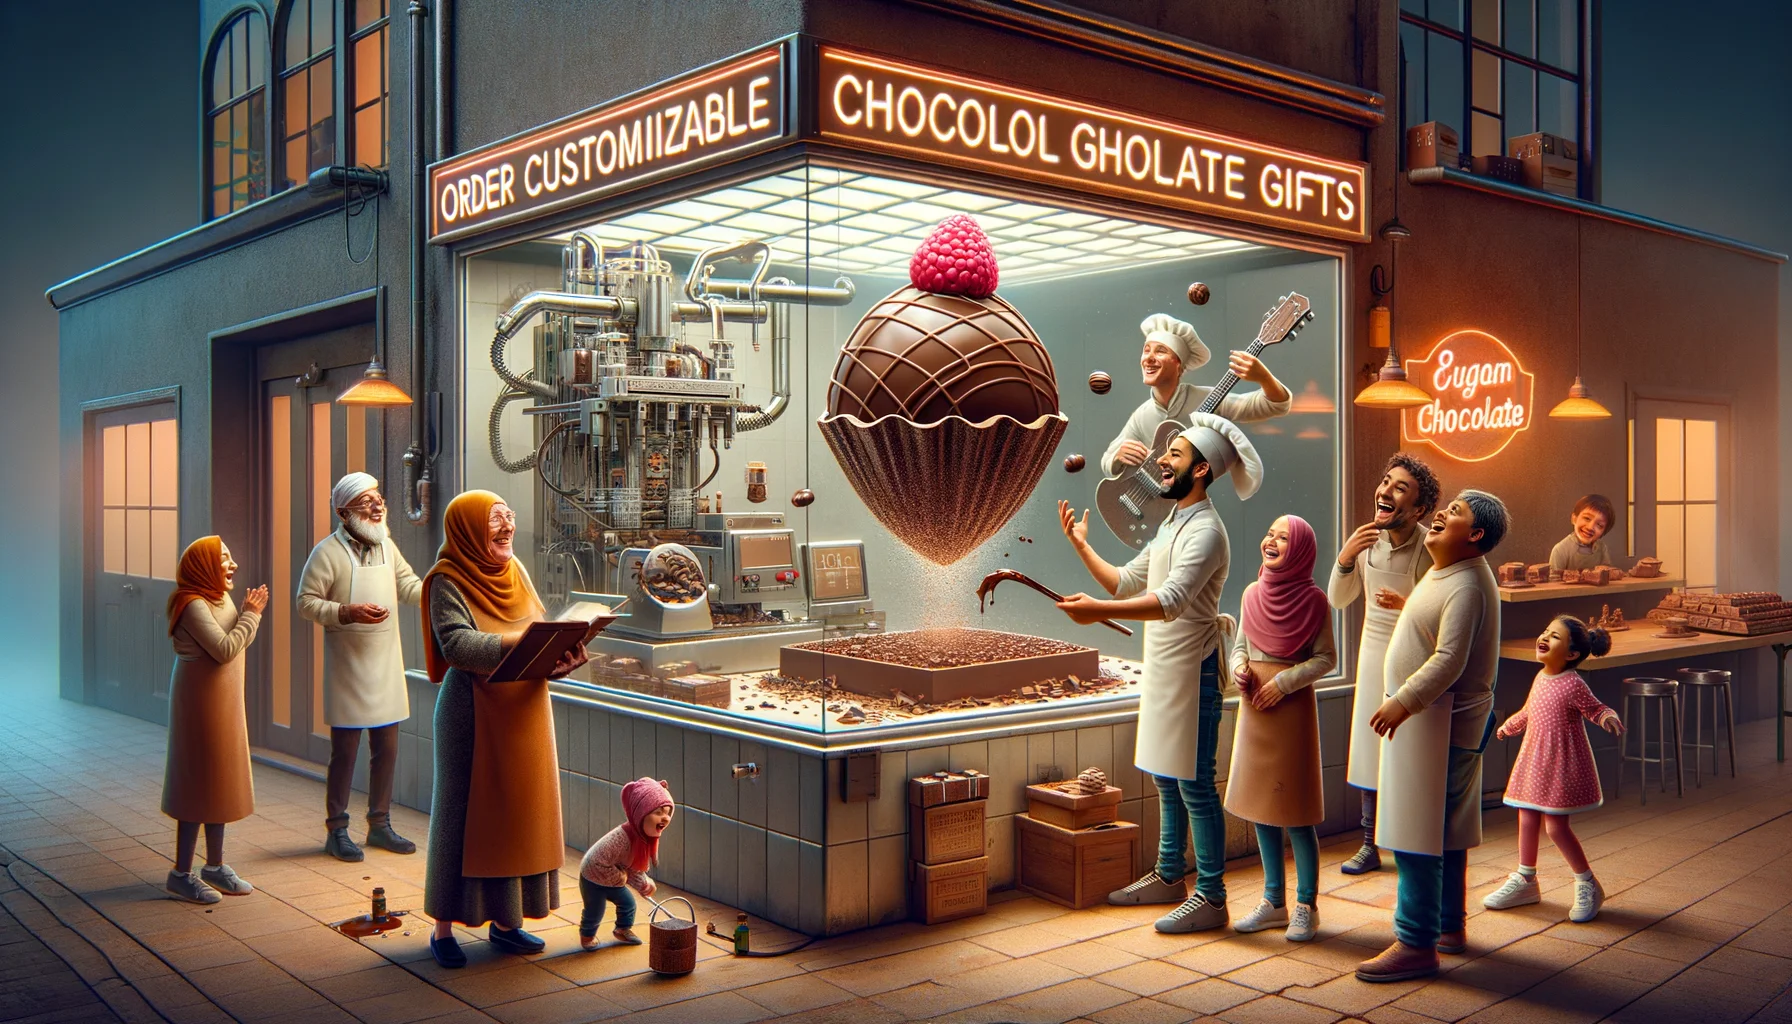 Create a humorous, realistic scenario representing the concept of 'Order Customizable Chocolate Gifts.' Picture this: A small, warm chocolaterie filled with the sweet aroma of melting chocolate. On one side, there's a huge clear glass wall showing the entire process of chocolate making, with robotic machines carefully crafting unique chocolate shapes. On the other side, a group of people of different ages and descents such as a Middle-Eastern elderly woman, a young Caucasian male, and a Hispanic little girl are laughing at a chocolate sculpture of a levitating truffle that's playing a guitar, a uniquely humorous customizable gift. A neon sign reads 'Order Customizable Chocolate Gifts' 